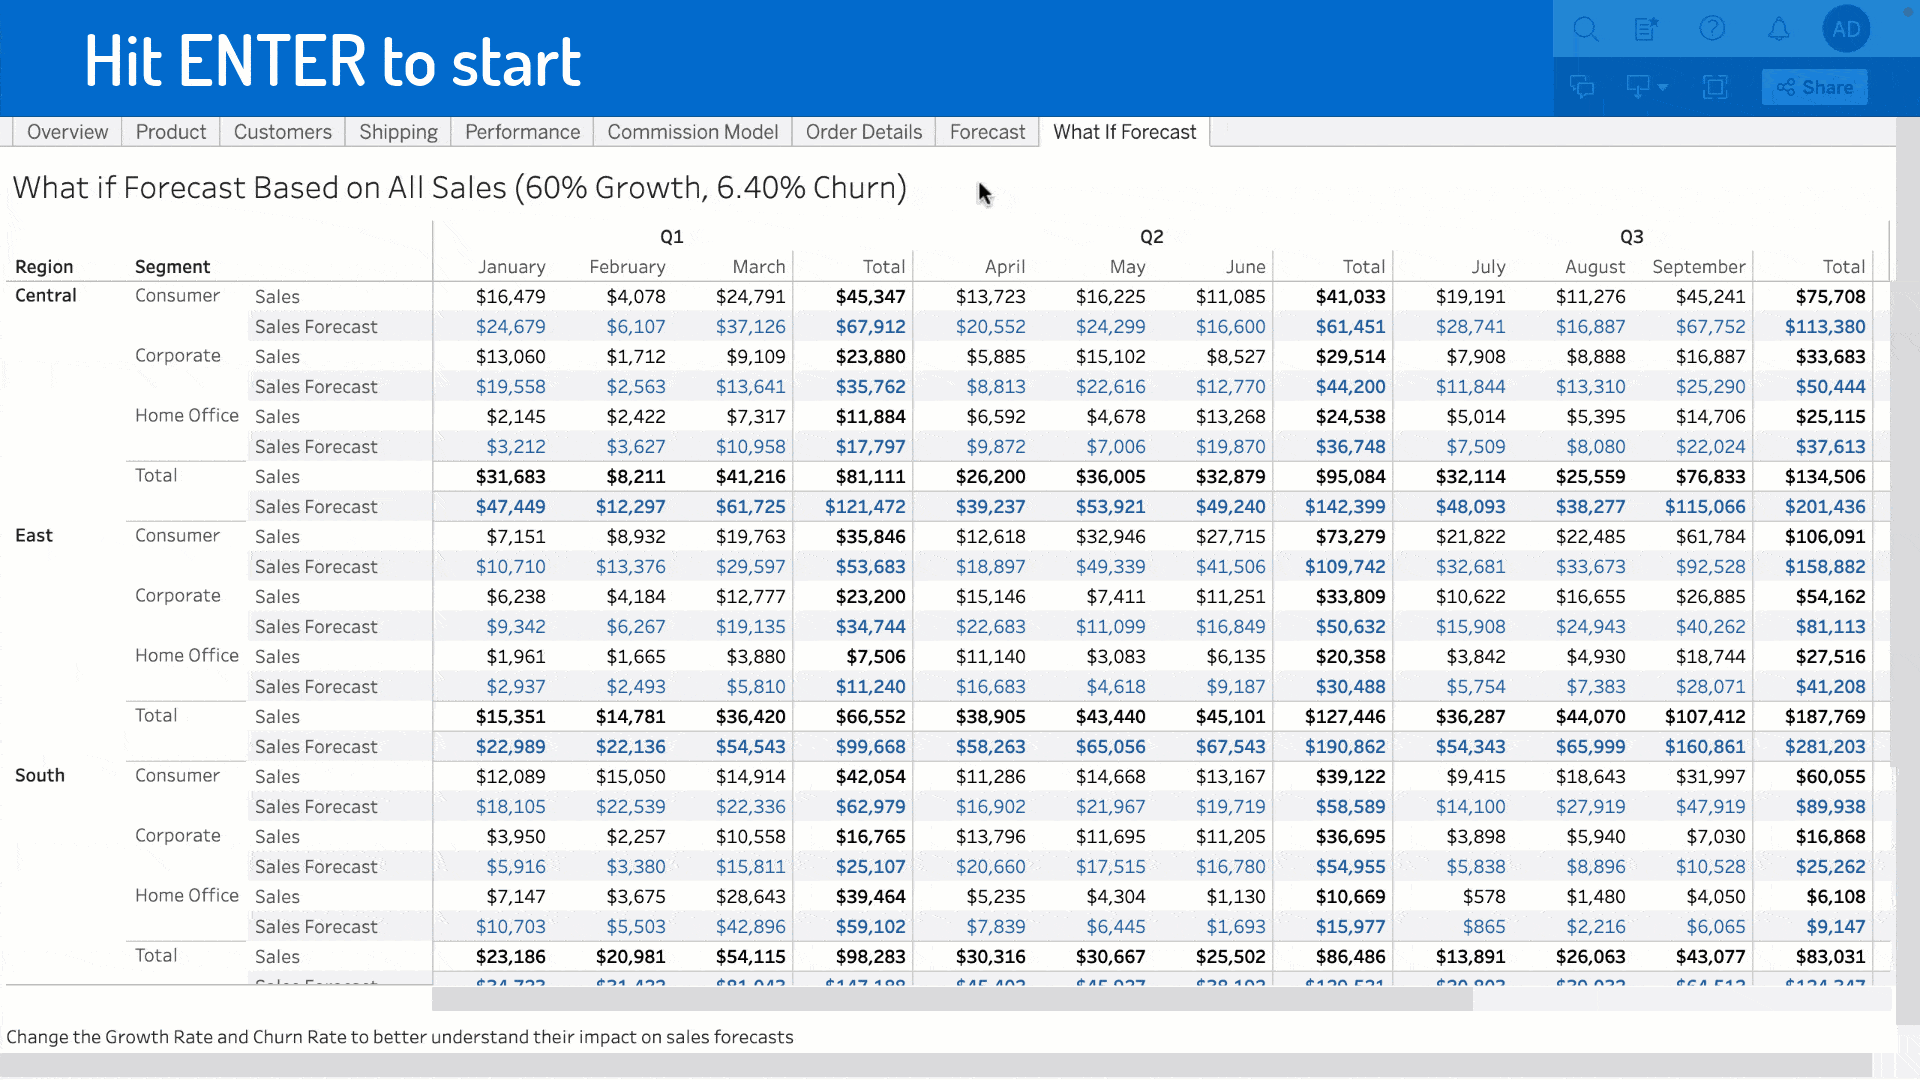 Animation of a cursor moving over text in a table of forecasted sales values